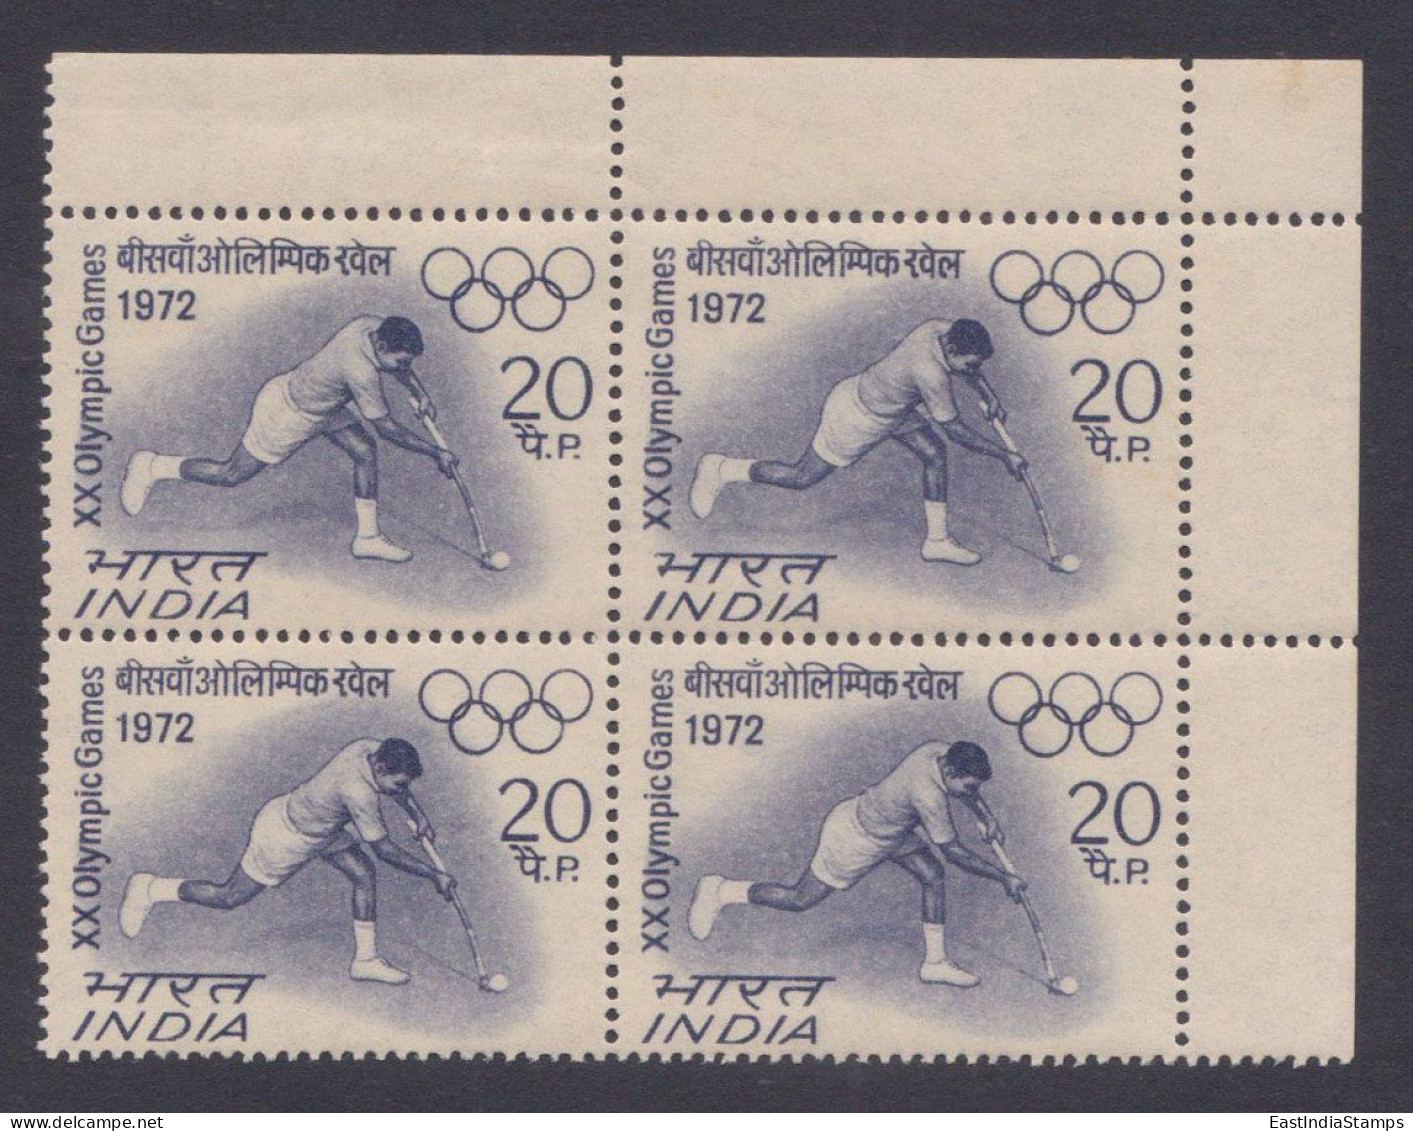 Inde India 1972 MNH Olympic Games, Olympics, Sport, Sports, Hockey, Block - Unused Stamps